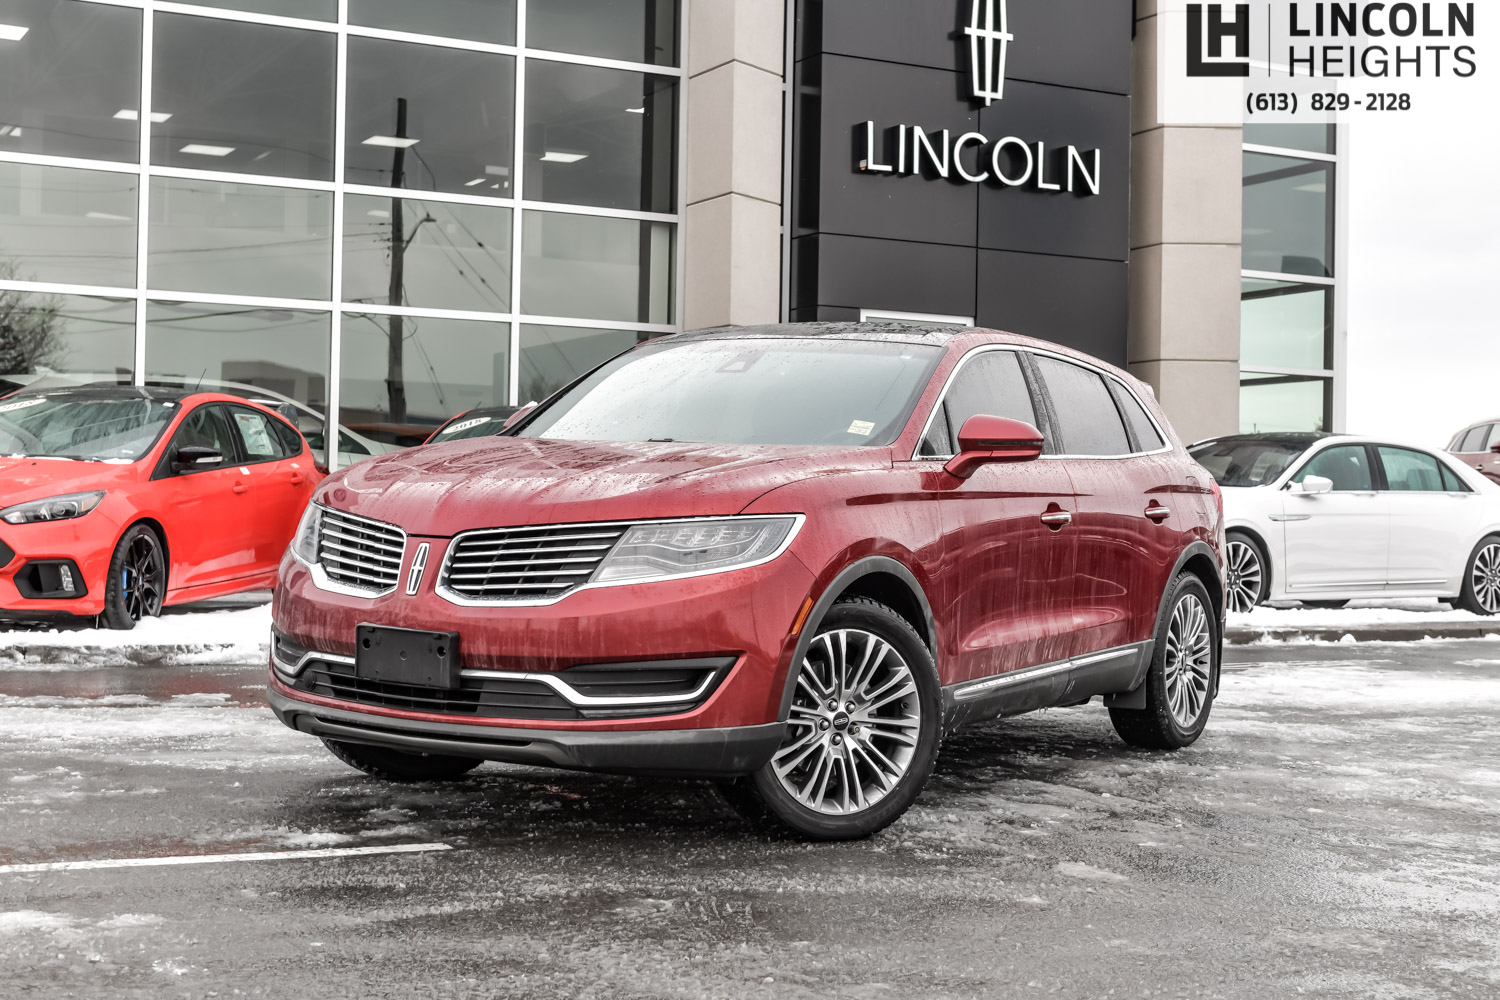  Lincoln MKX RESERVE - HEATED/COOLED SEATS - BLUETOOTH